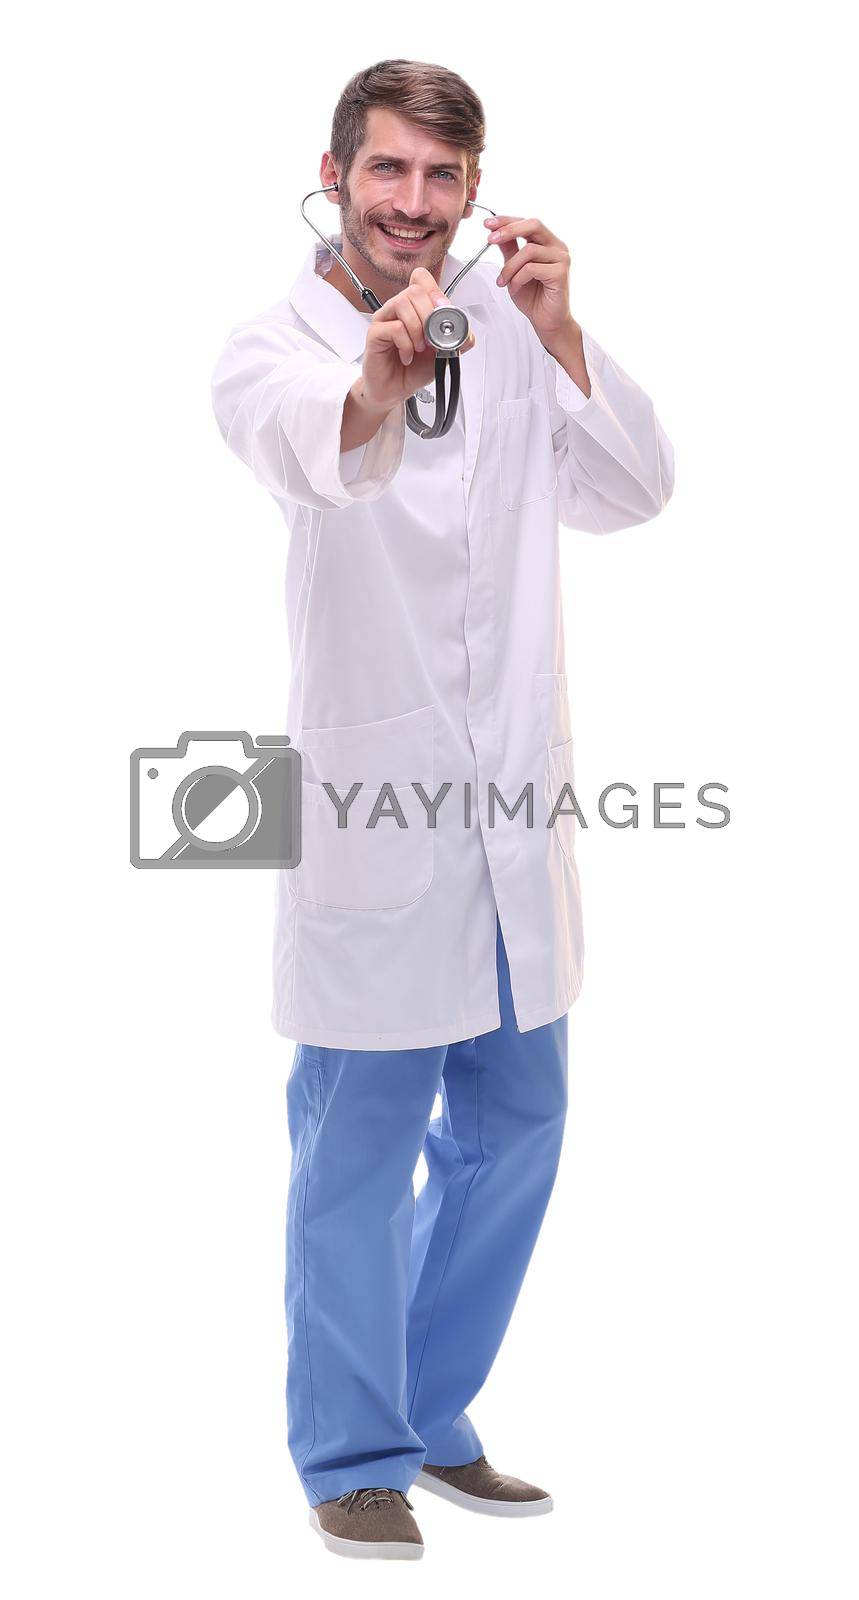 Royalty free image of in full growth. attentive doctor therapist with stethoscope by asdf